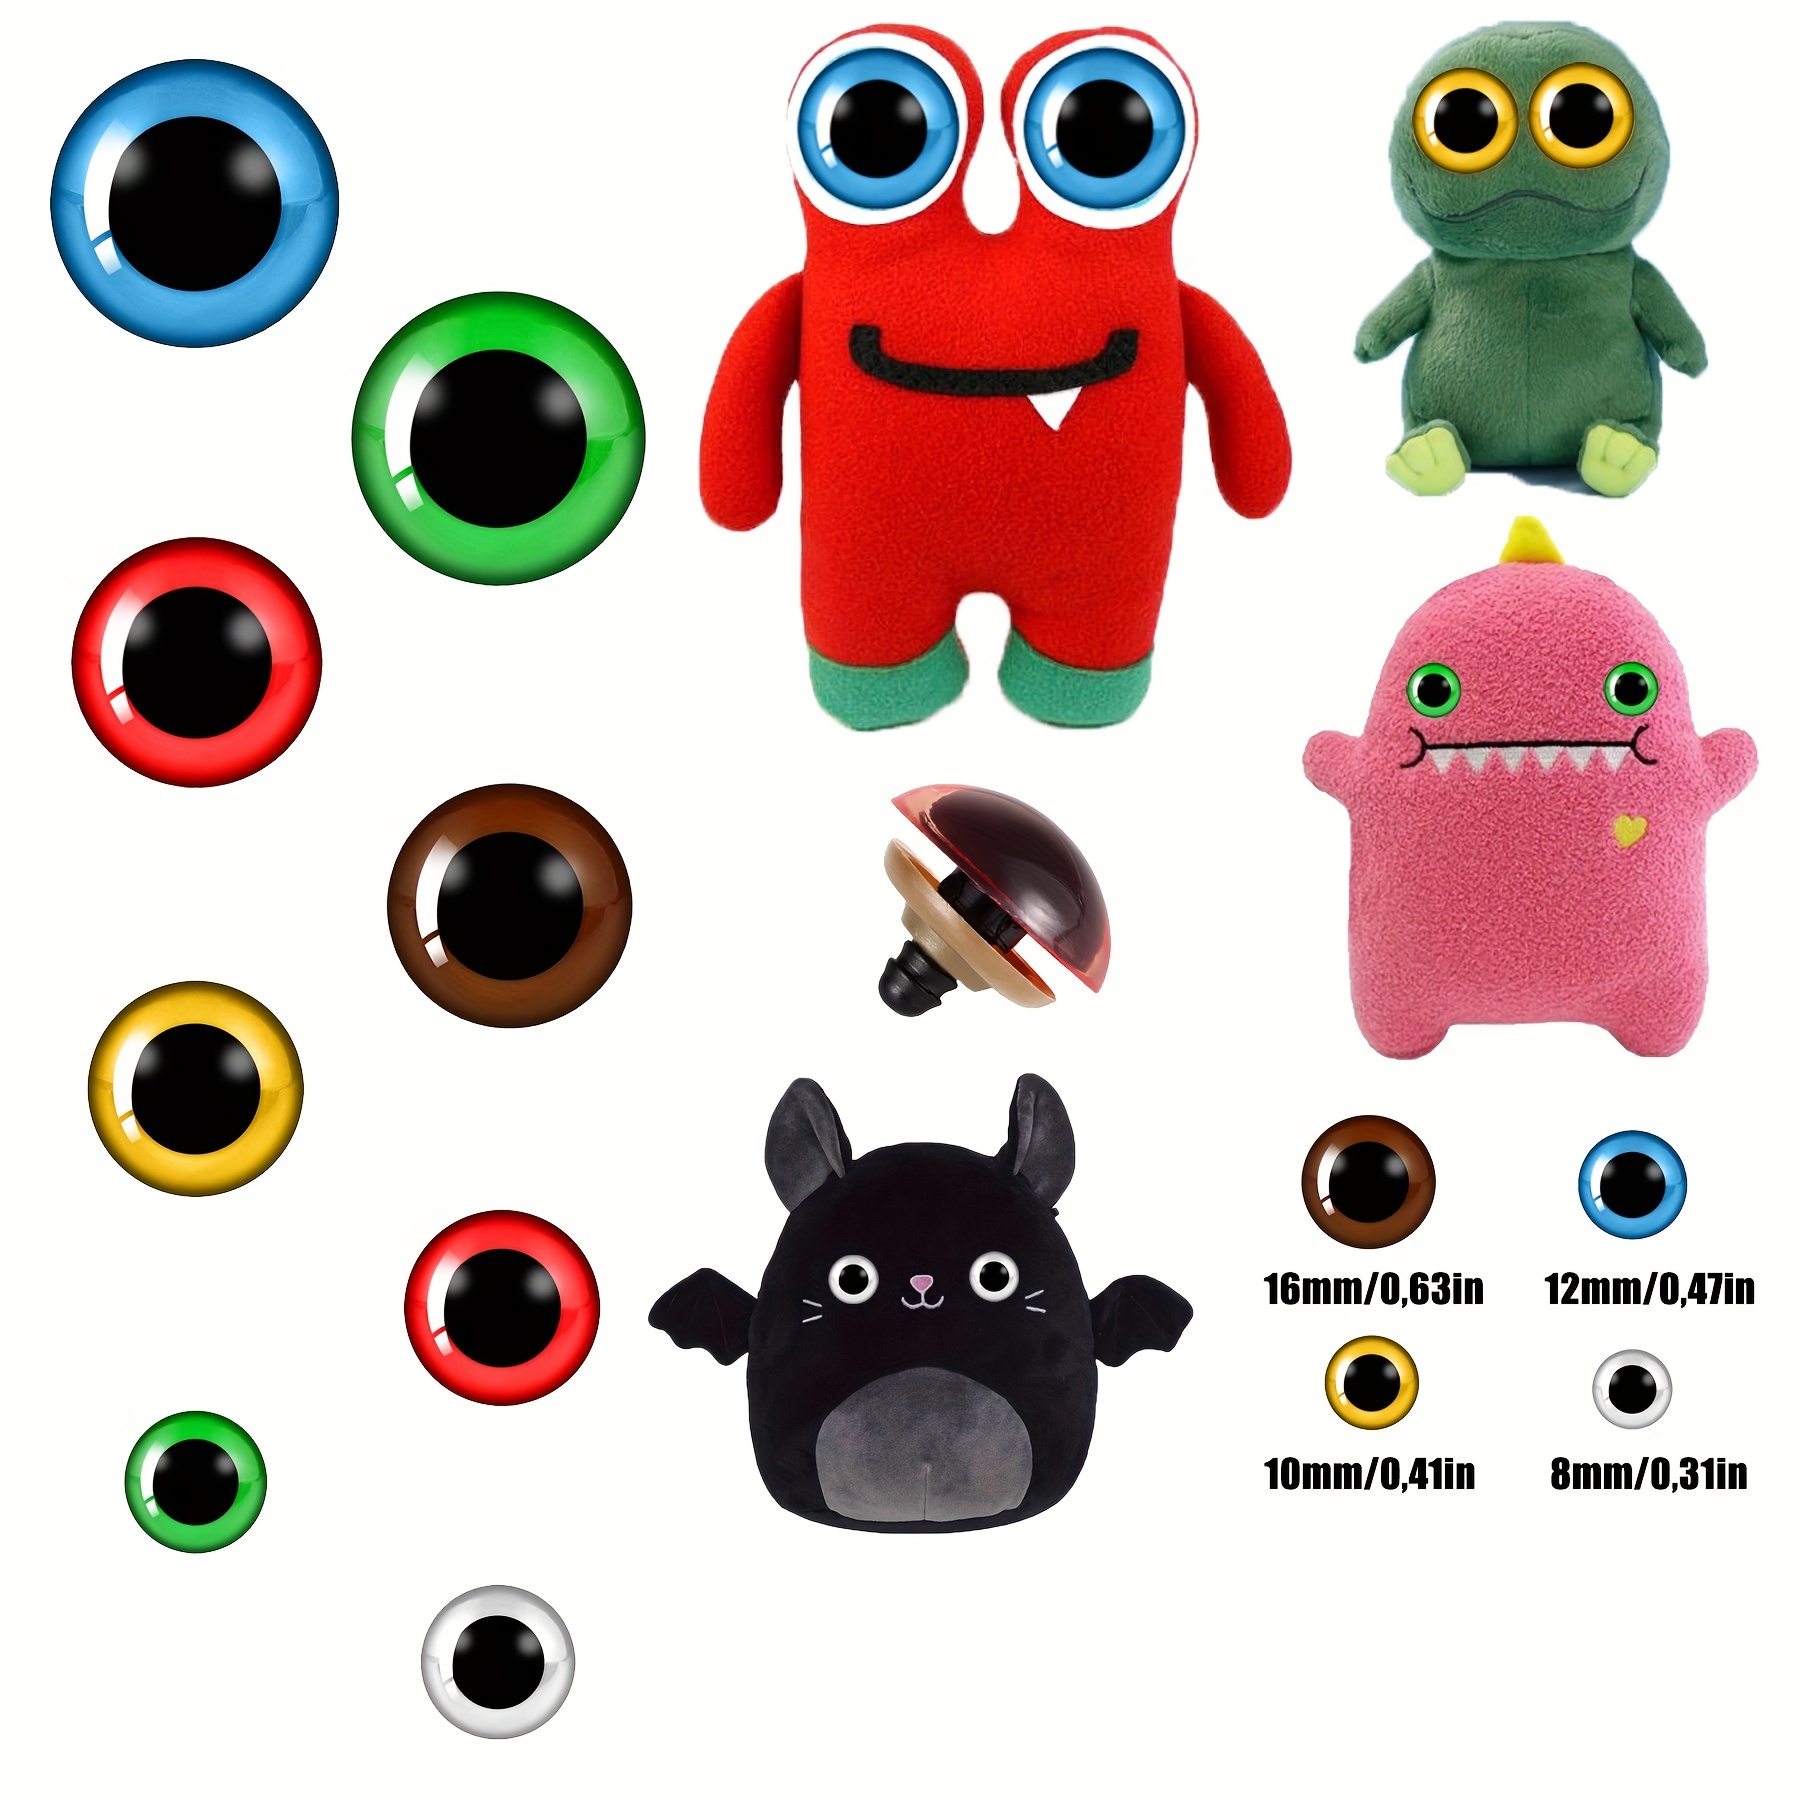 Plastic Safety Eyes for Amigurumi, 240PCS 6mm - 14mm Black Solid Craft Doll  Eyes with Washers for Crafts, Crochet Toy and Stuffed Animals